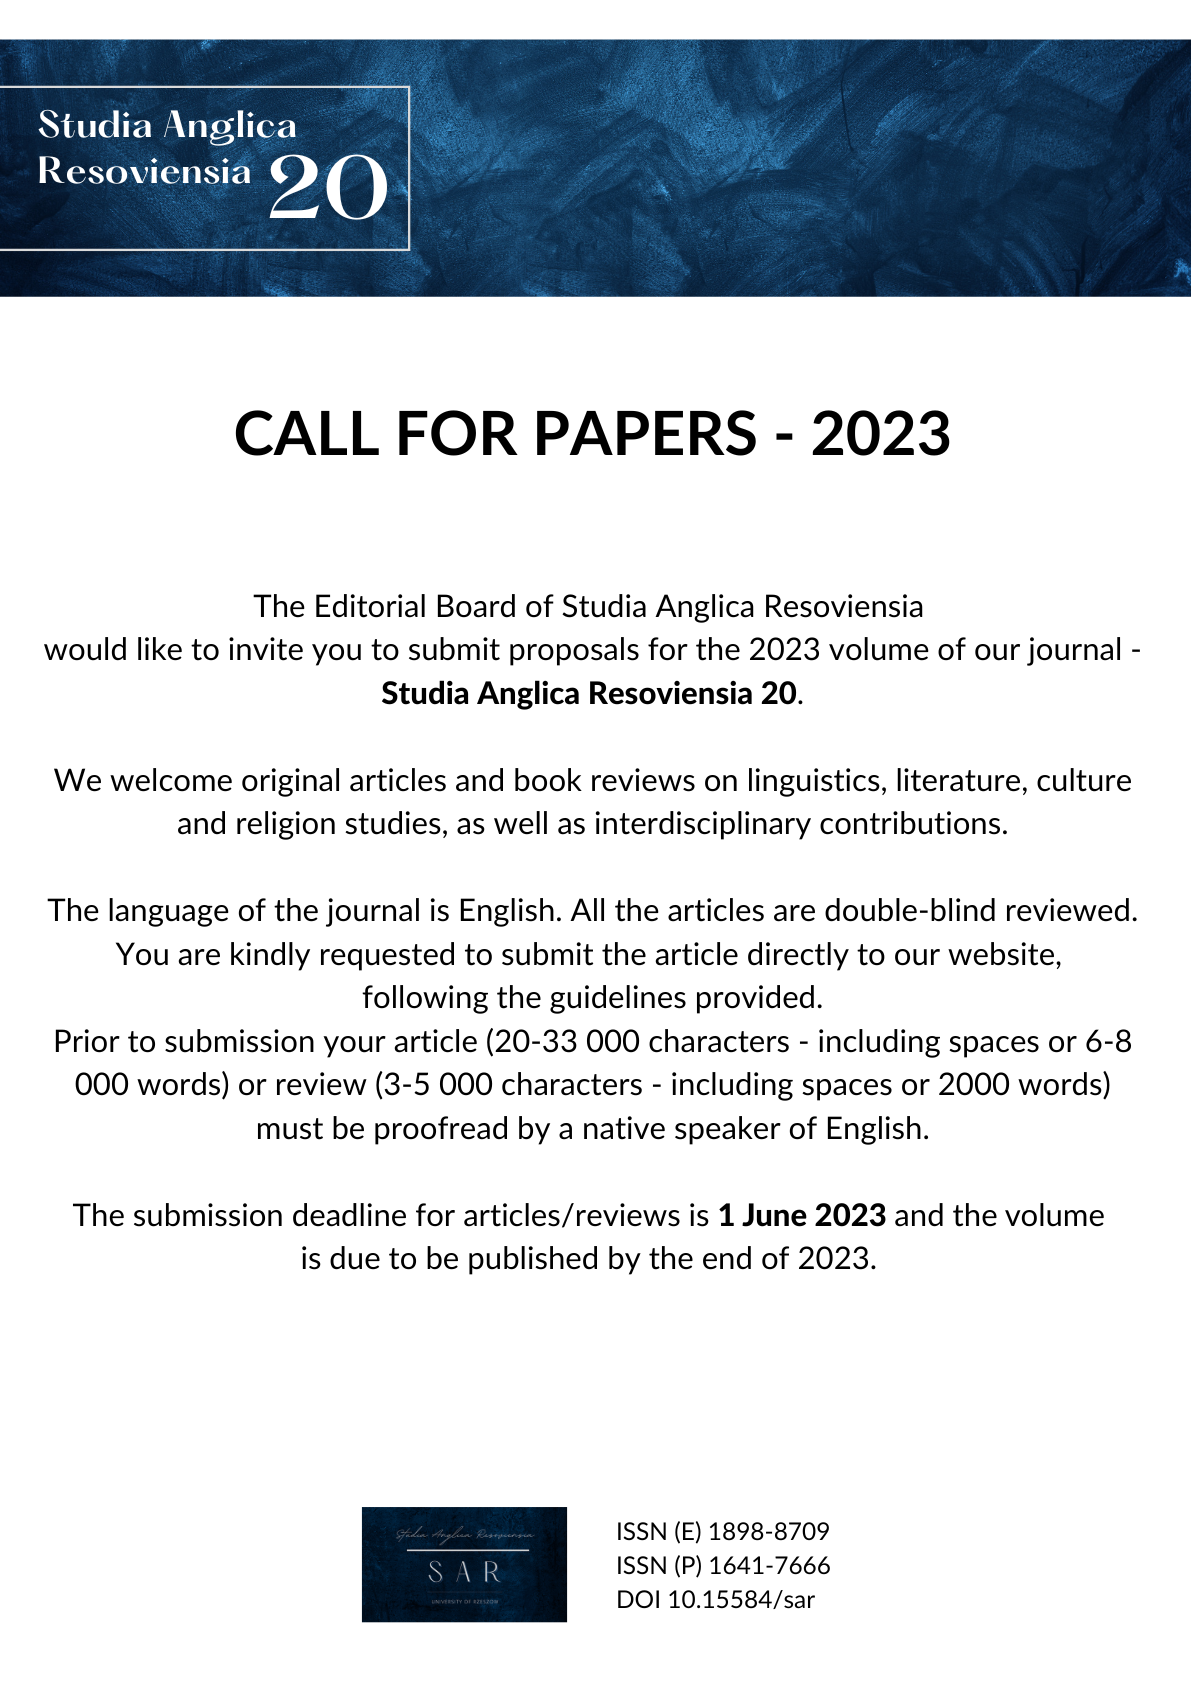 Call for Papers 2023